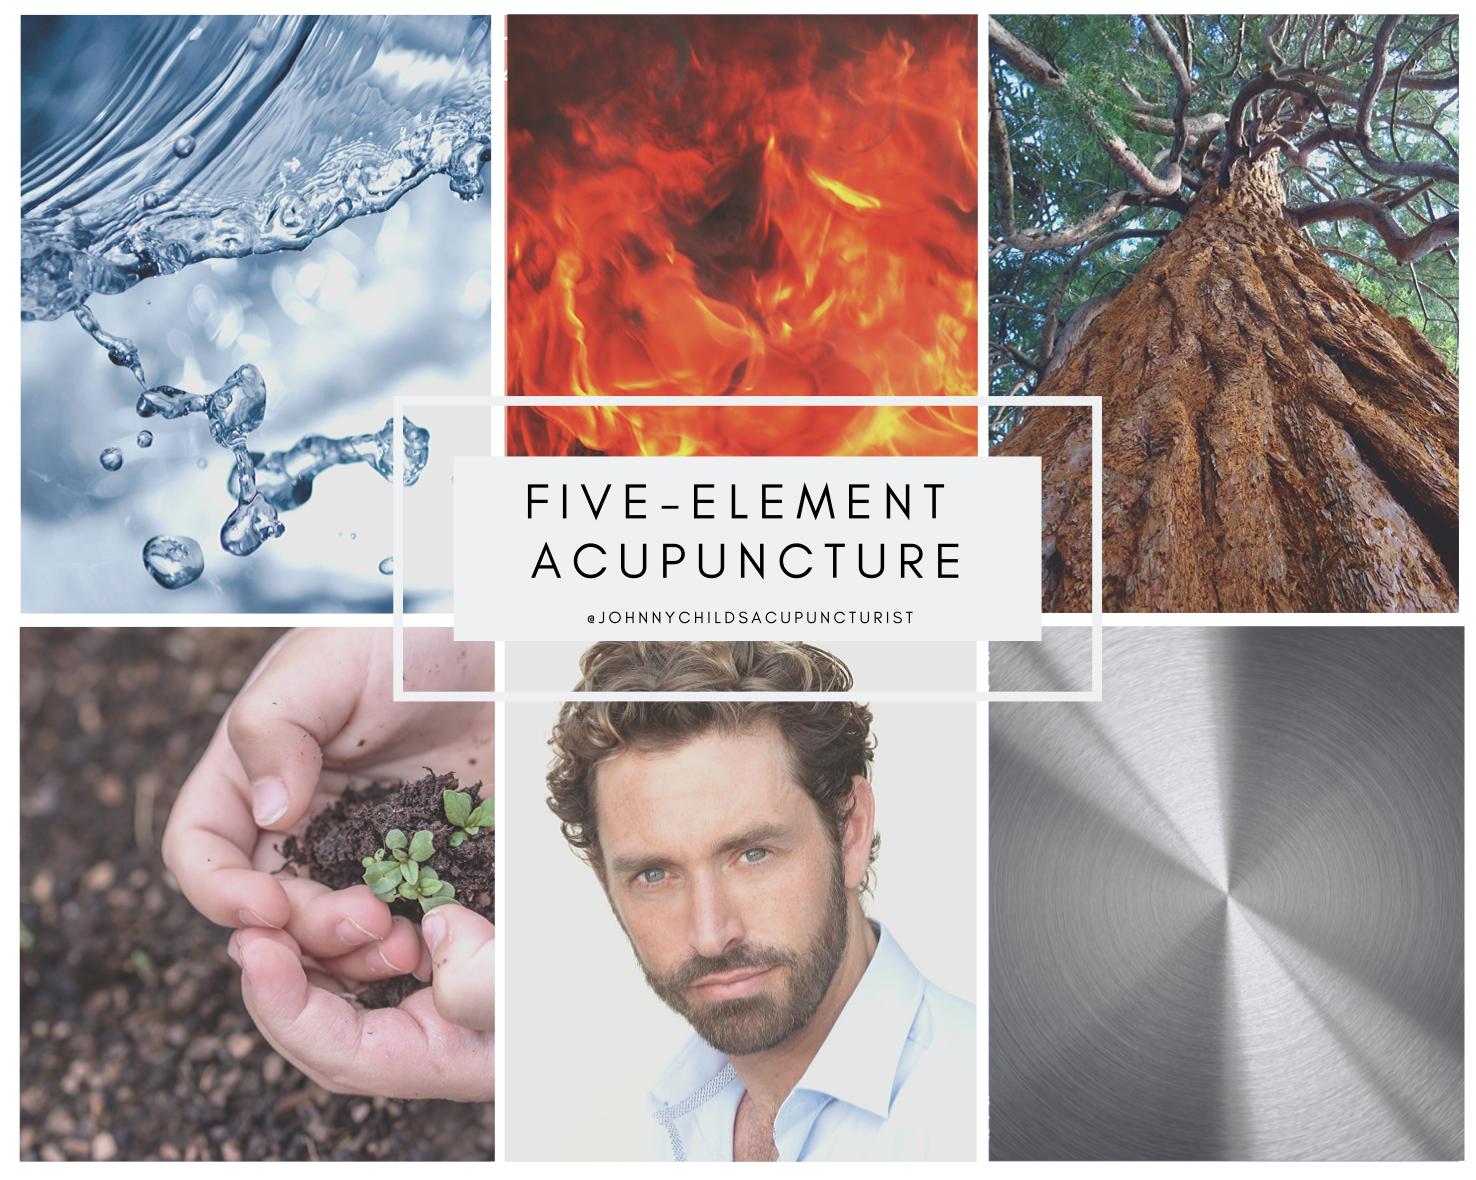 Tom Tries It: Five Element Acupuncture